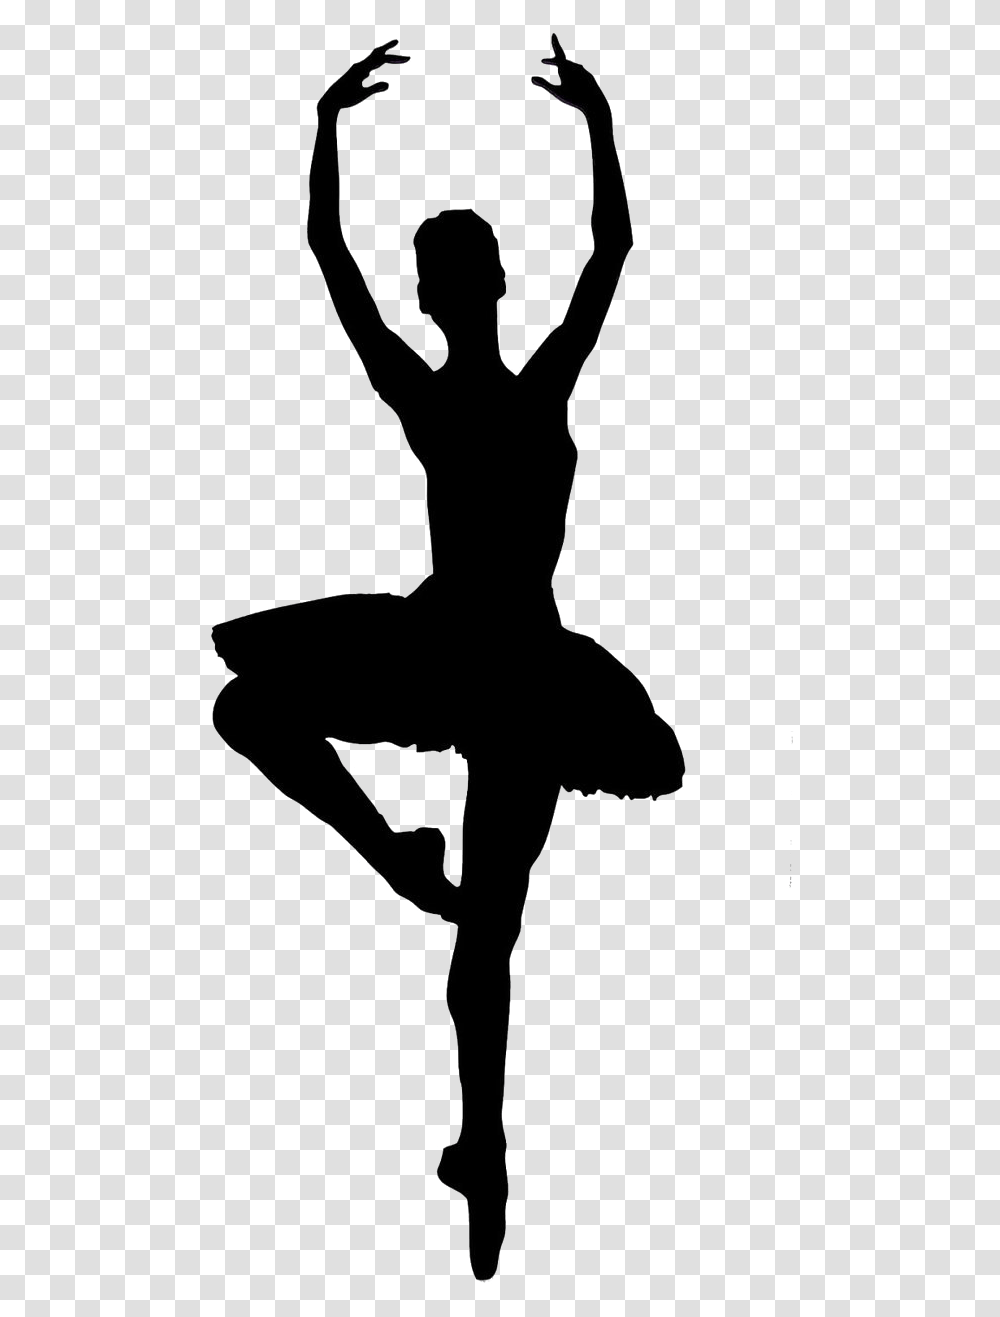 Ballerina Silhouette Image Background Ballet Dancer Silhouette, Leisure Activities, Dance Pose Transparent Png